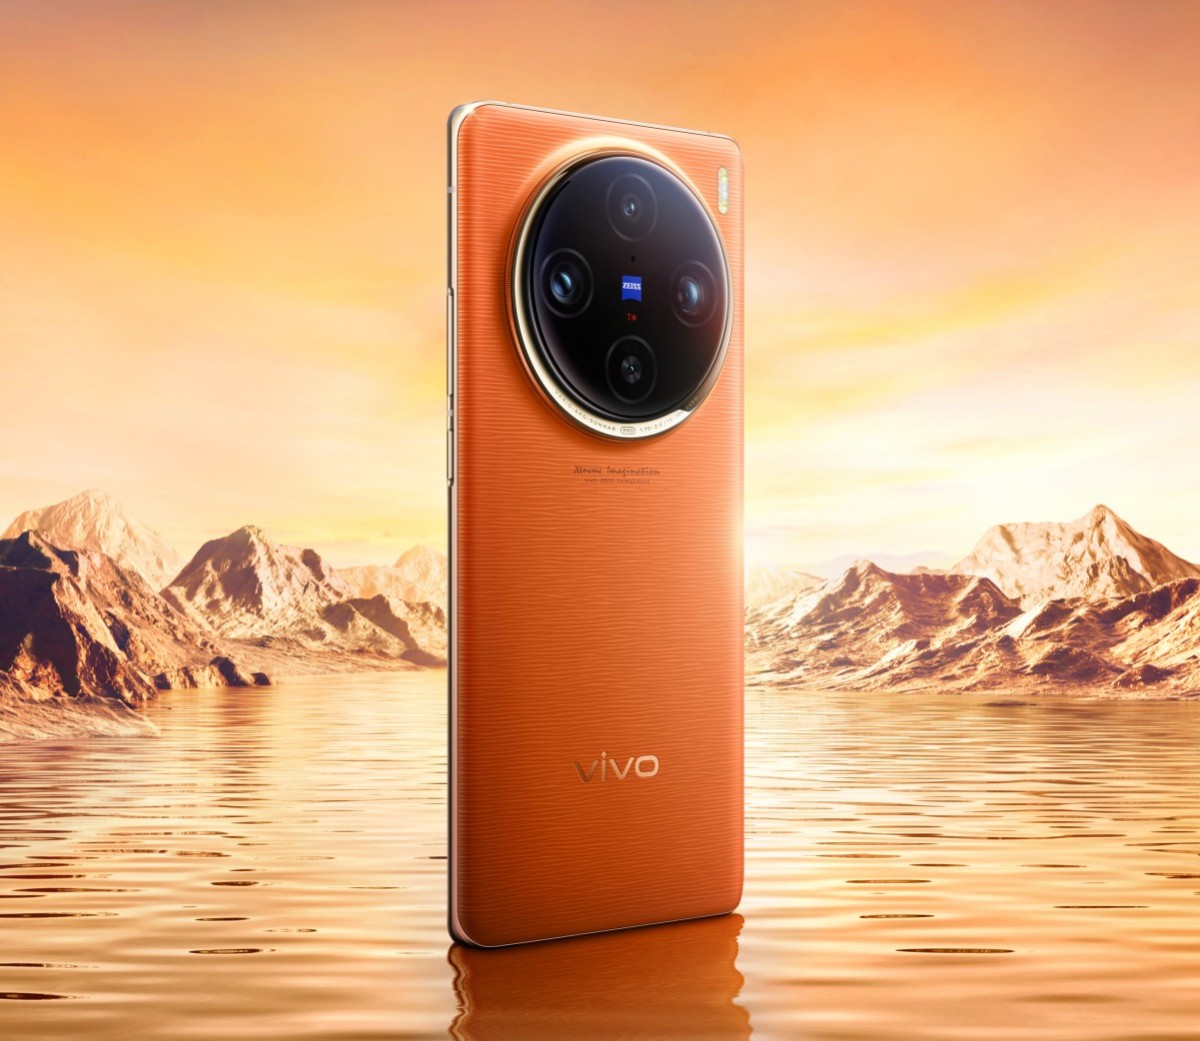 Vivo X100 Pro launch date in India confirmed - Check expected price and ...